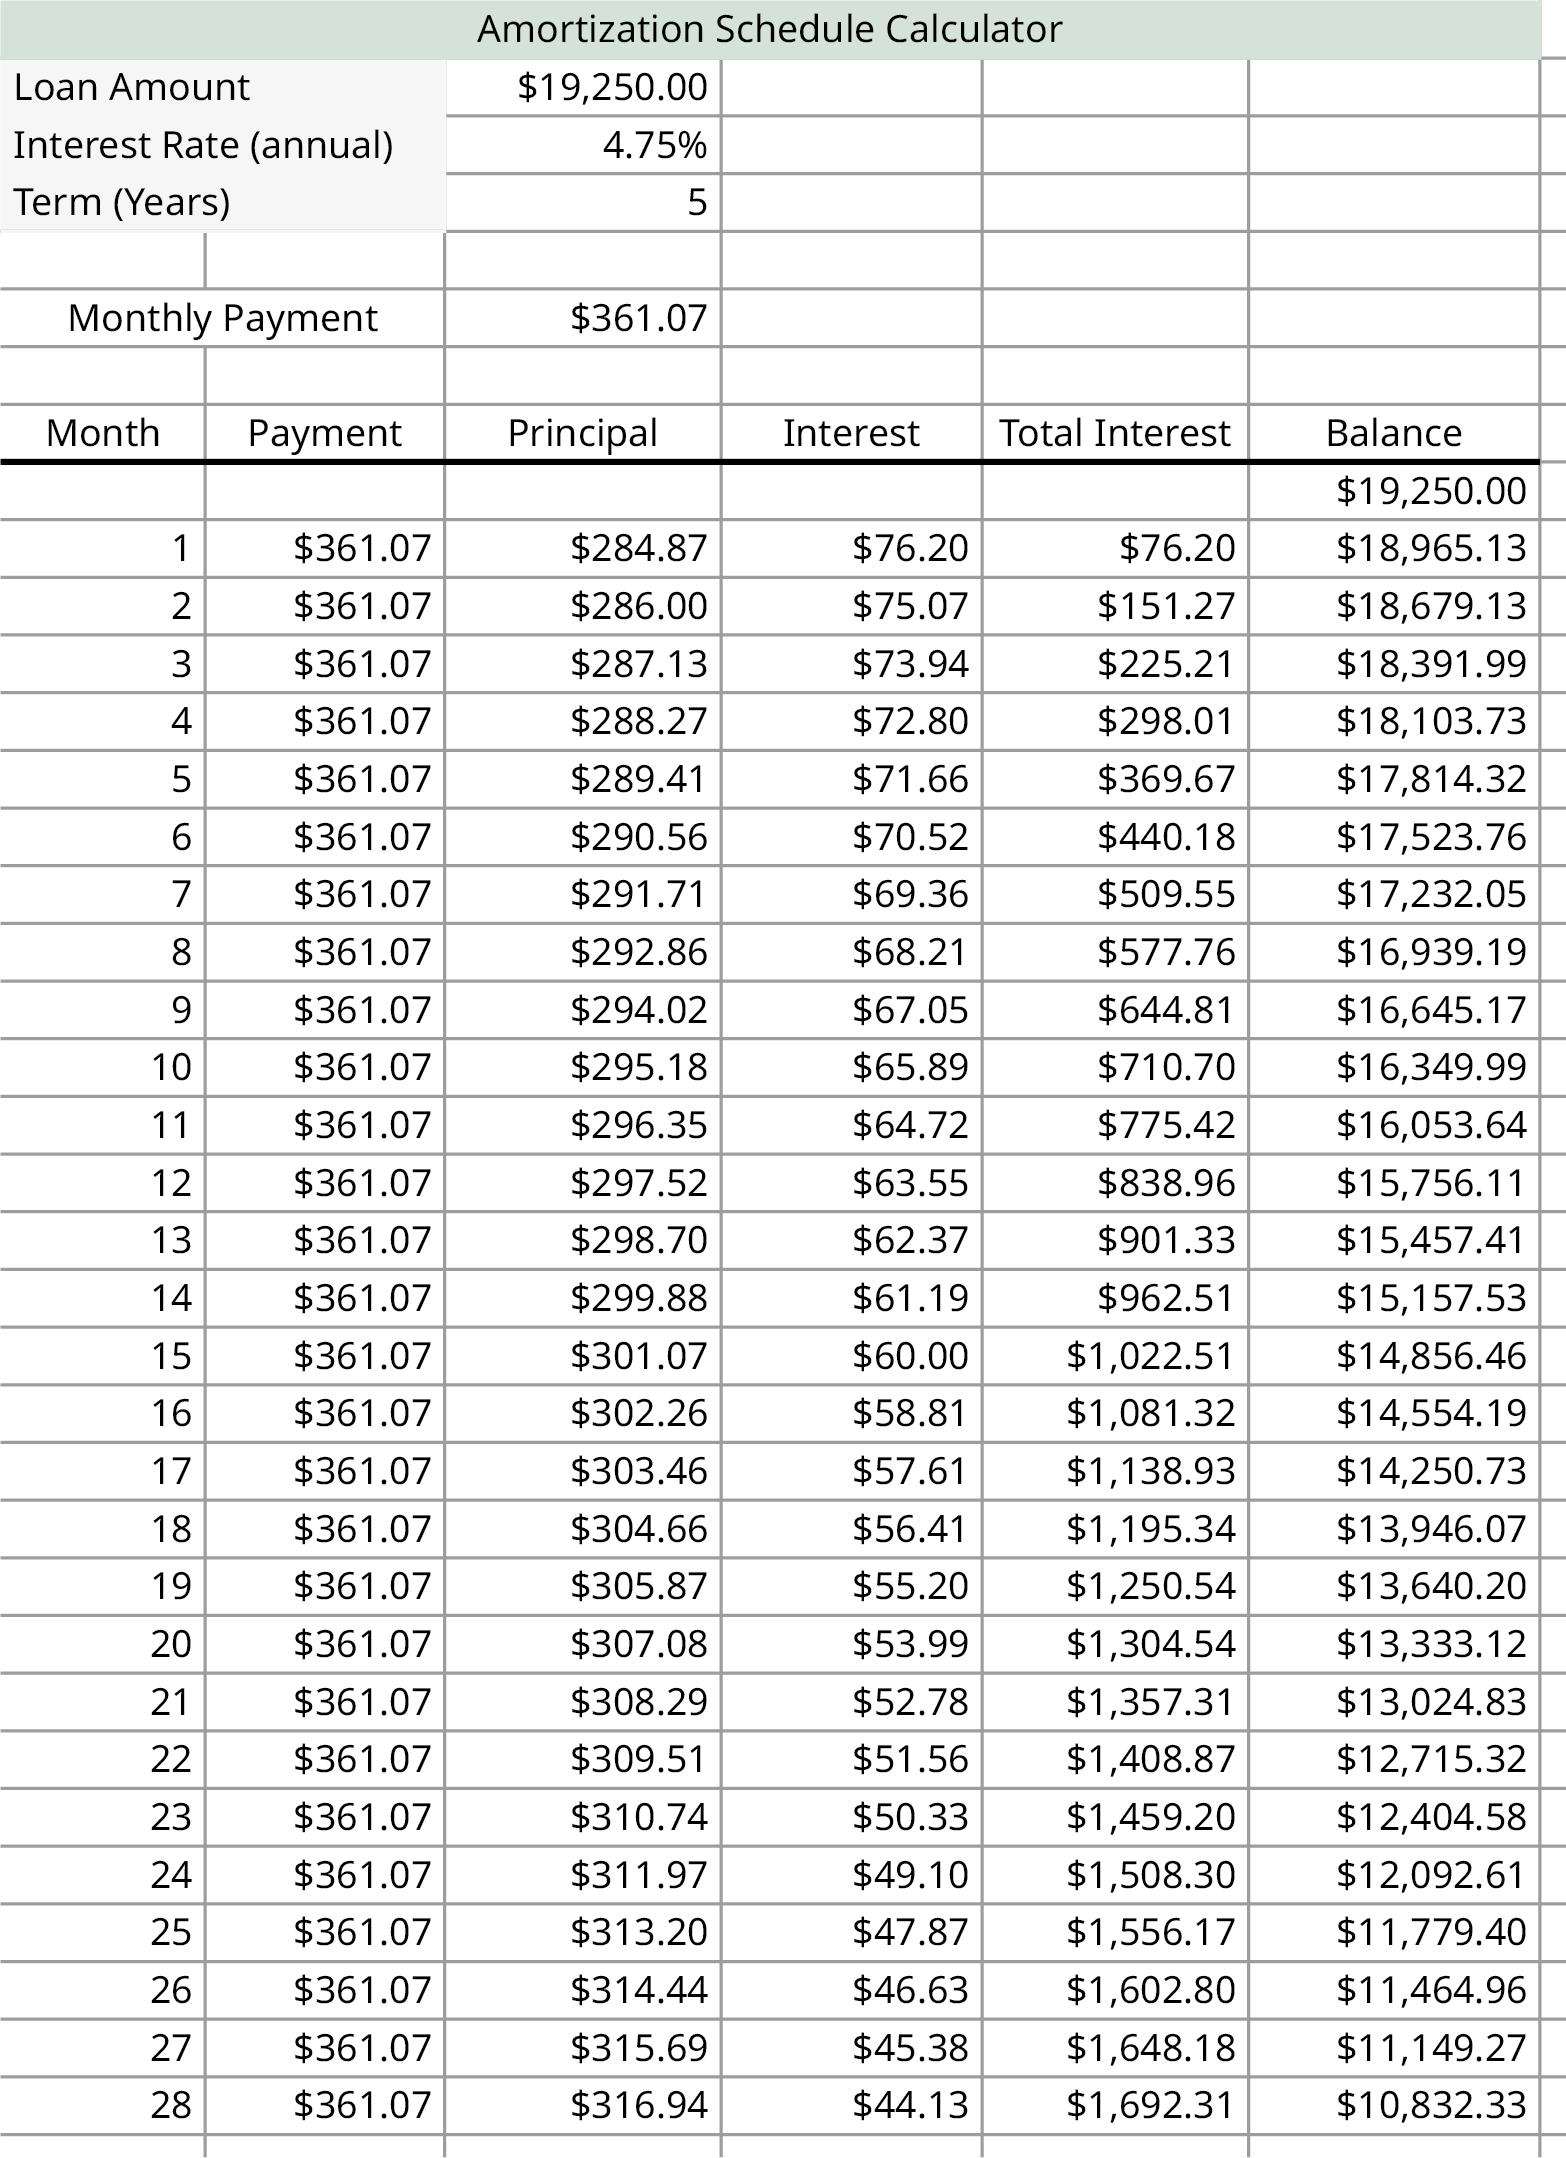 A spreadsheet labeled as amortization schedule calculator. The sheet calculates the repayment for the loan amount of $19,250.00 for an interest rate of 4.75 percent annually and the monthly payment is $361.07 over 10 years. The factors include calculations such as month, payment, principal, interest, total, and interest and balance.